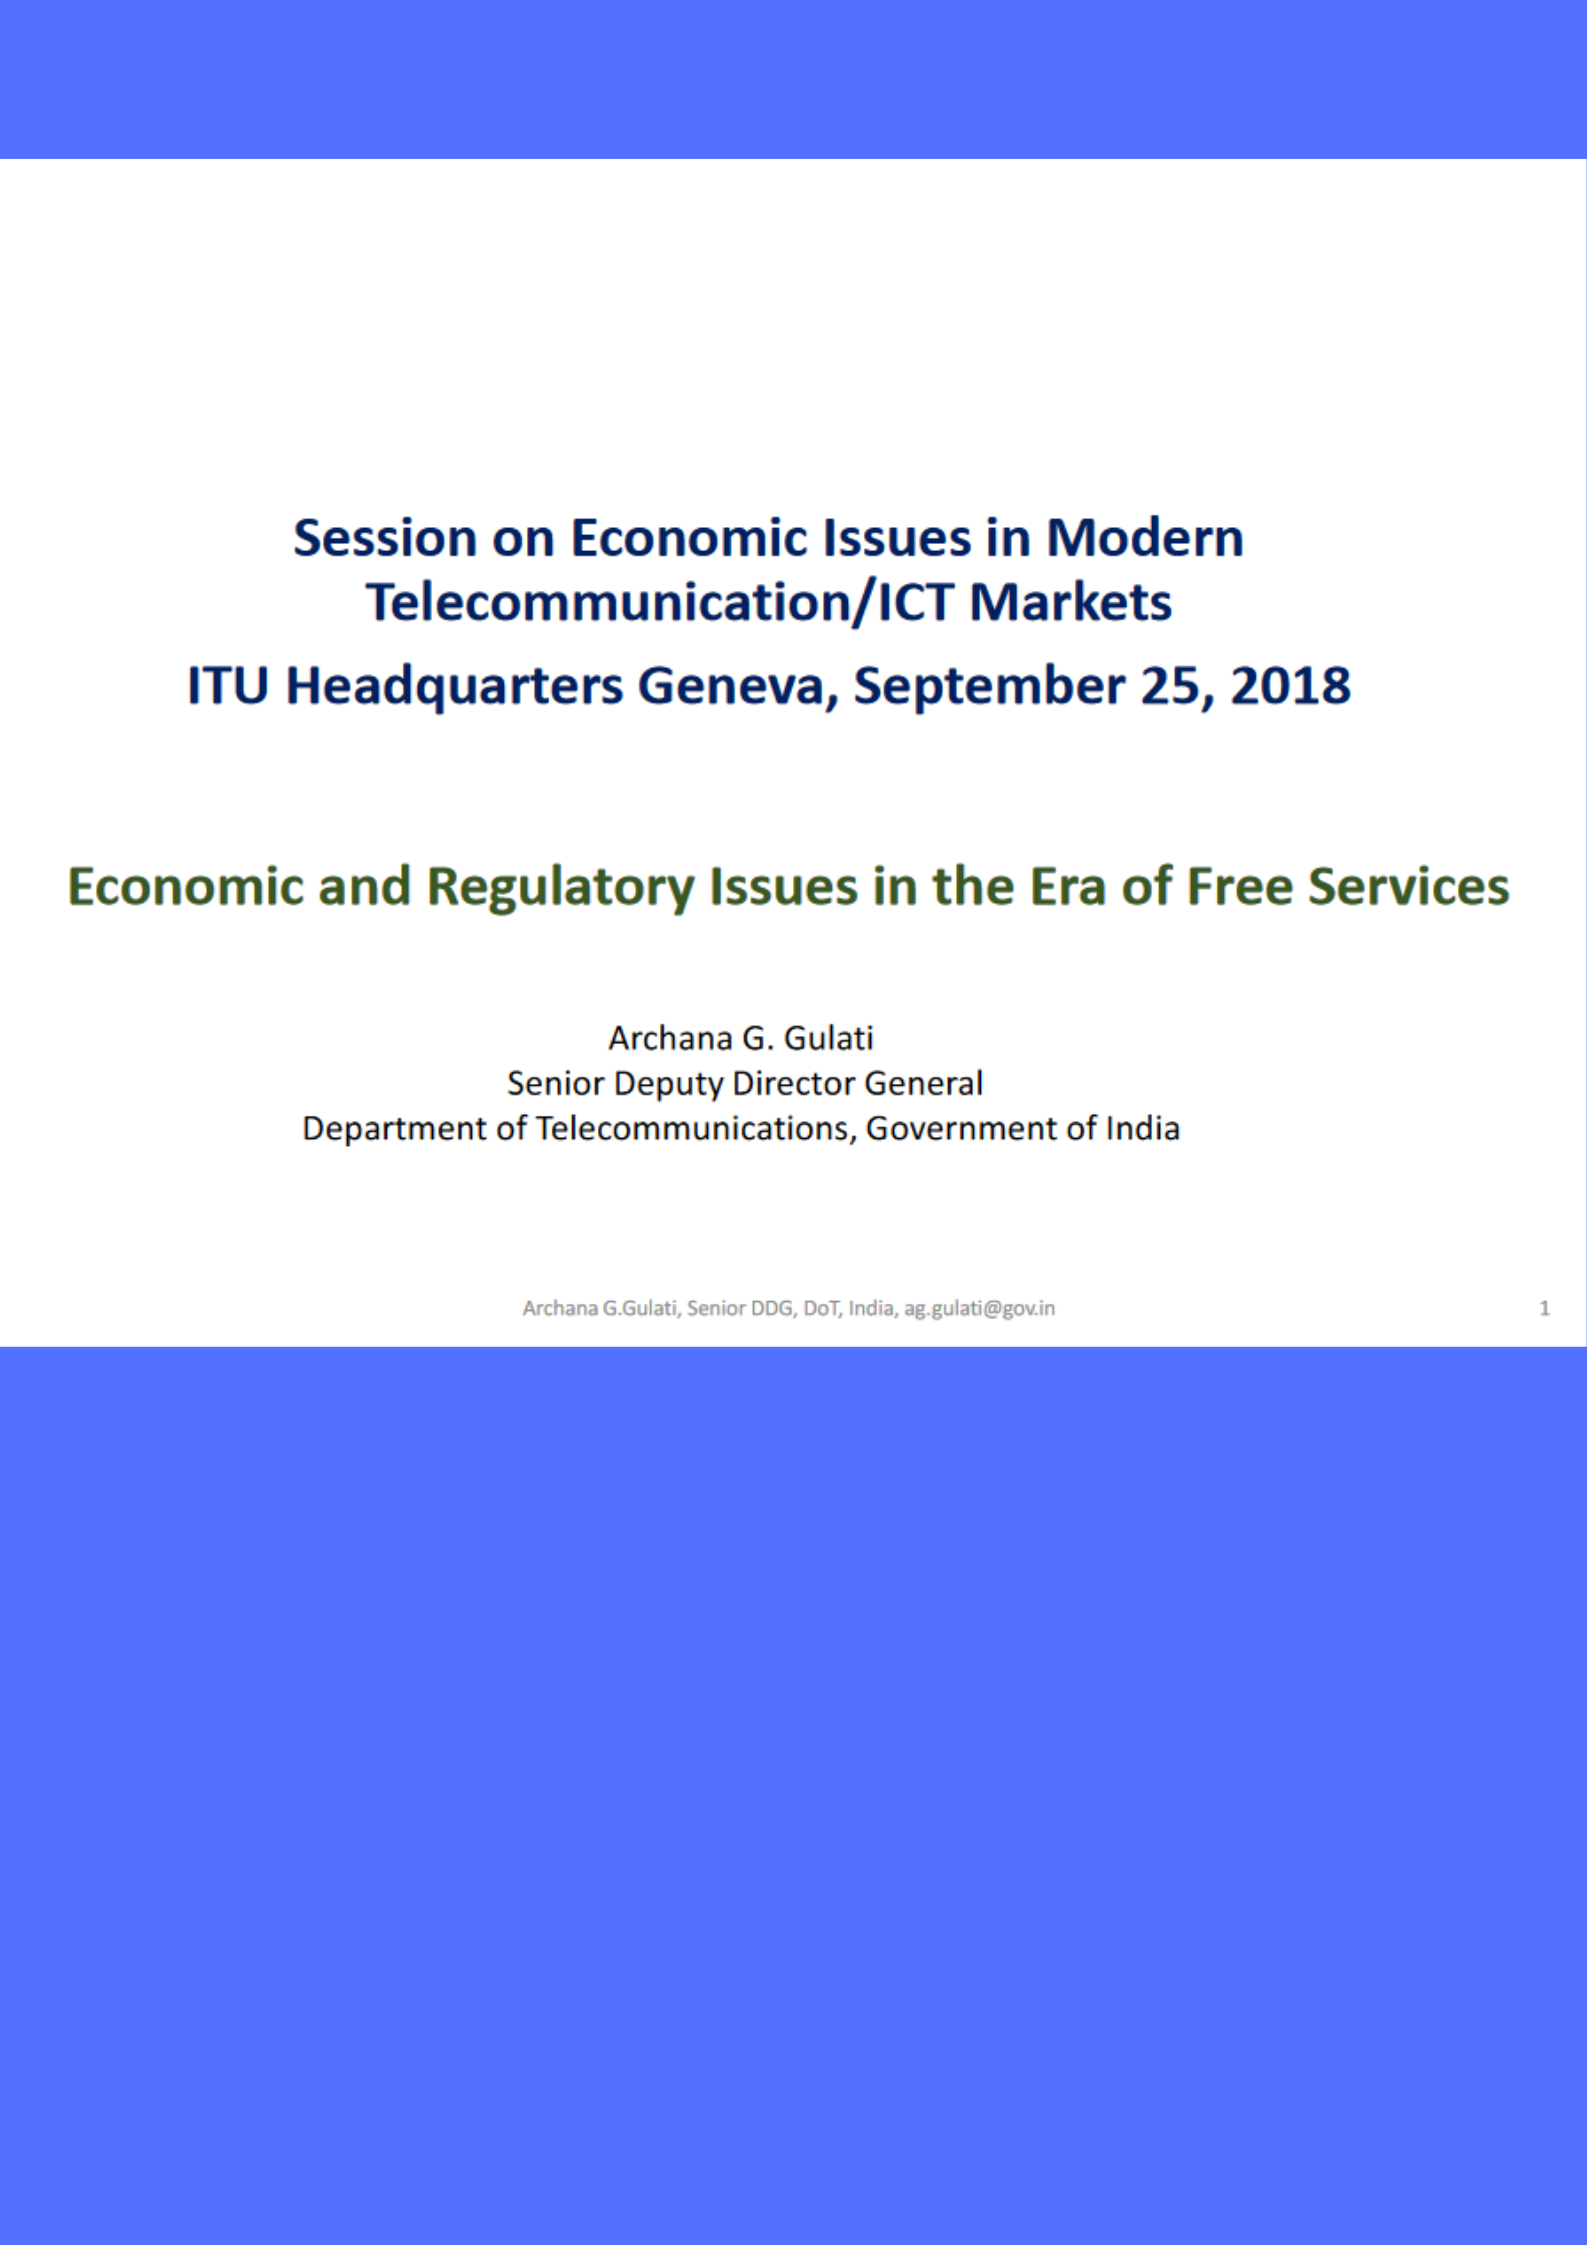 Economic and Regulatory issues in the Era of Free Services